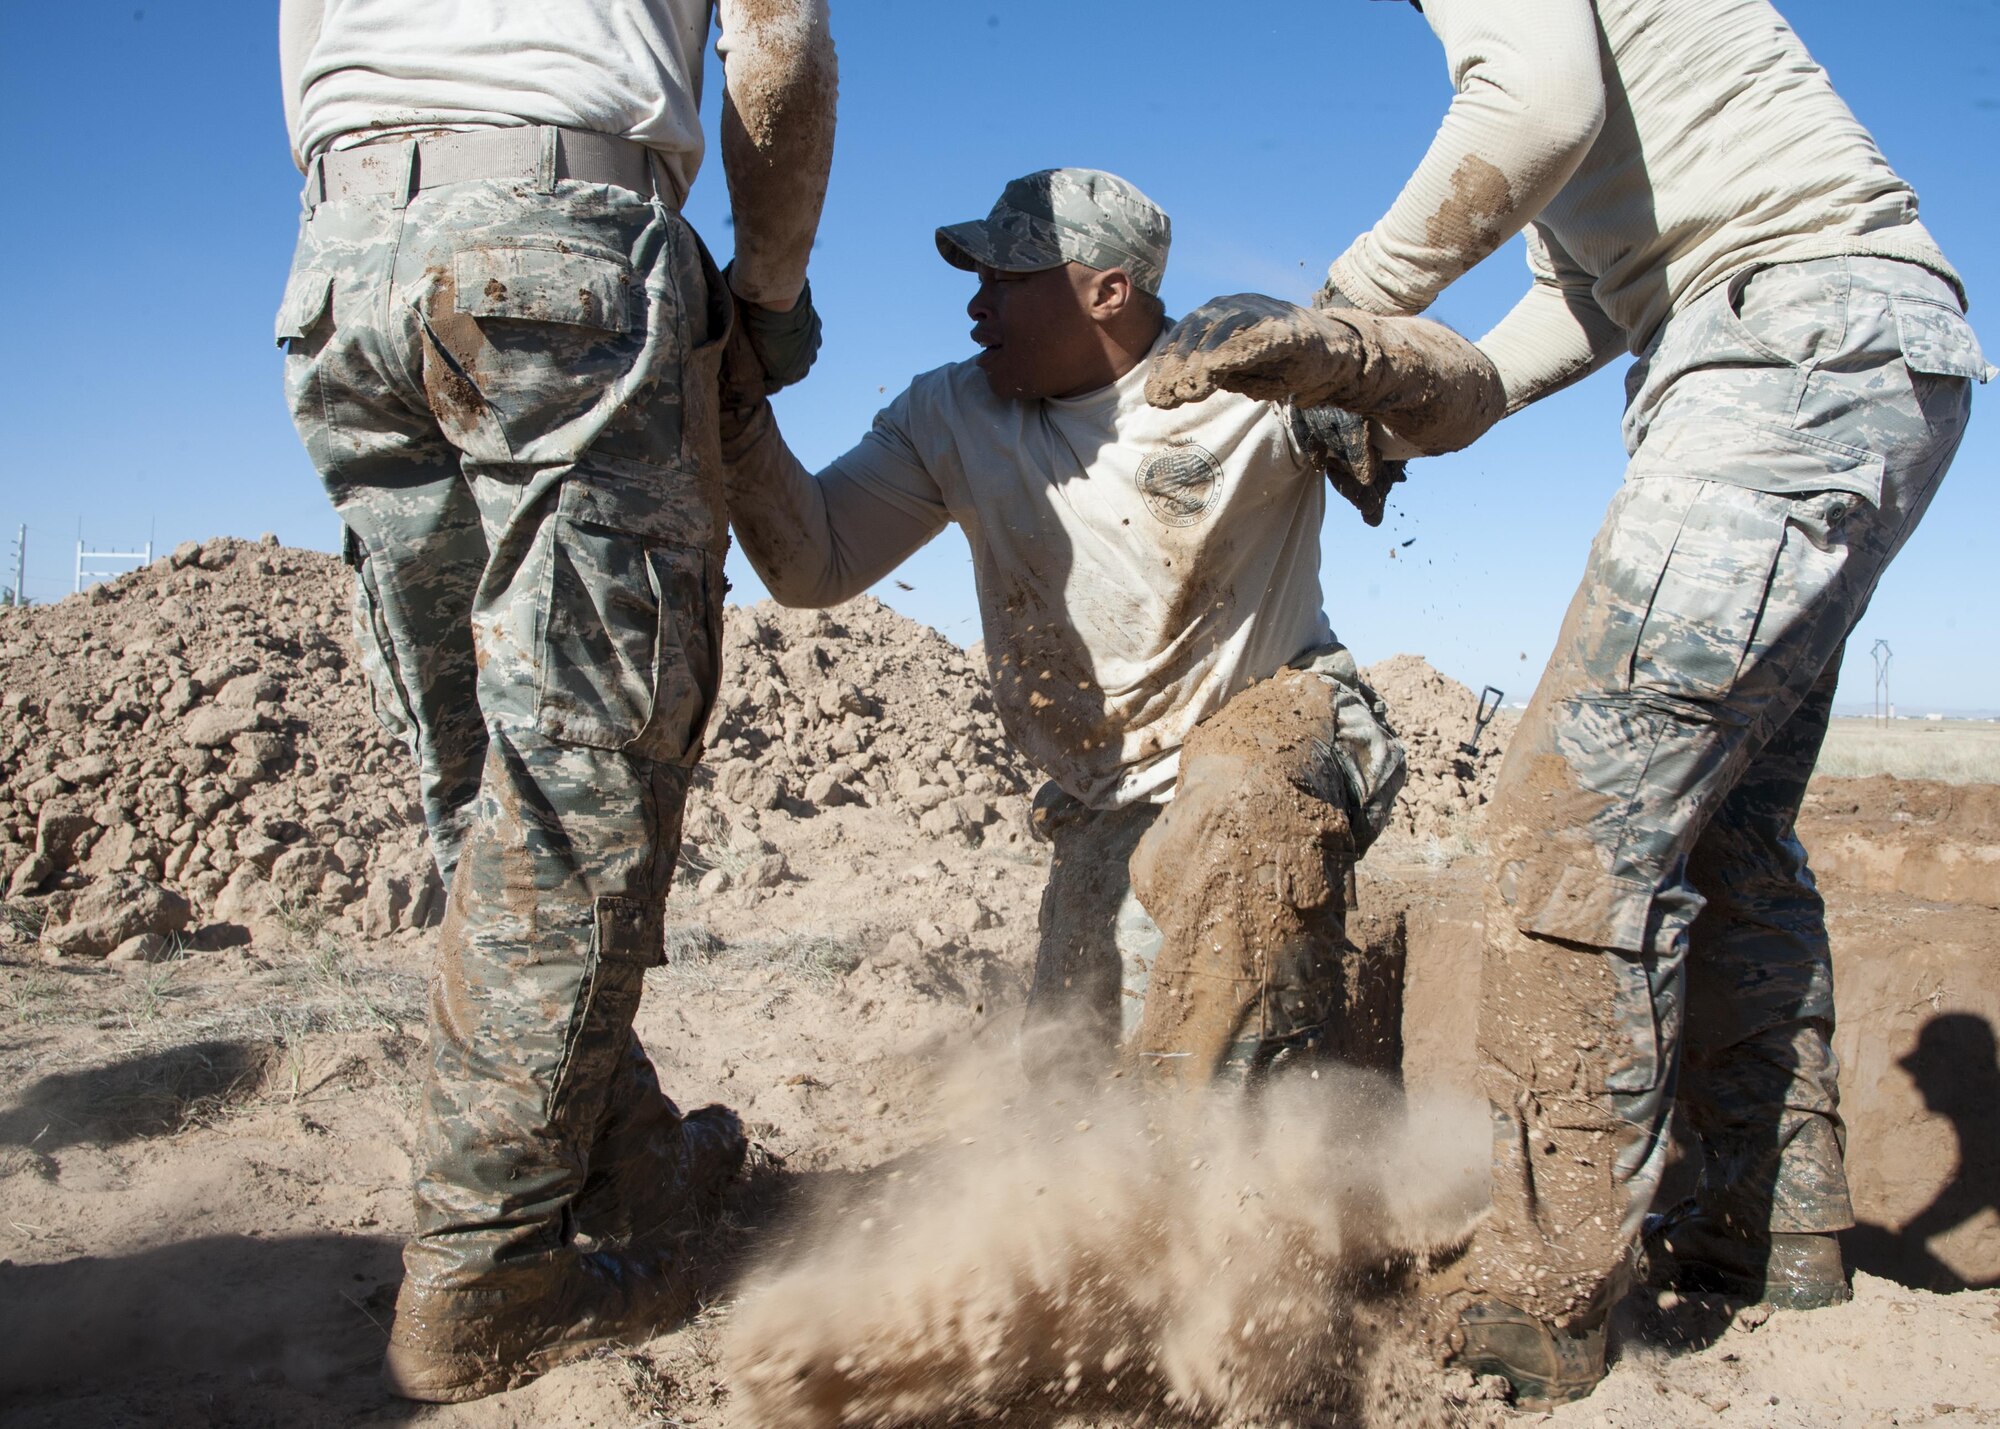 Staff Sgt. Raymond Thompkins 377th Weapons Systems Security Squadron, is assisted out of a five-foot hole by Senior Airmen Cody Ronson and Aaron Wallace, 377th WSSS, during the Manzano Challenge at Kirtland Air Force Base, N.M., Oct. 27. The competition featured Security Forces Airmen from across the 377th Security Forces Group divided into teams of four to compete on 13 stations. (U.S. Air Force photo by Staff Sgt. J.D. Strong II)